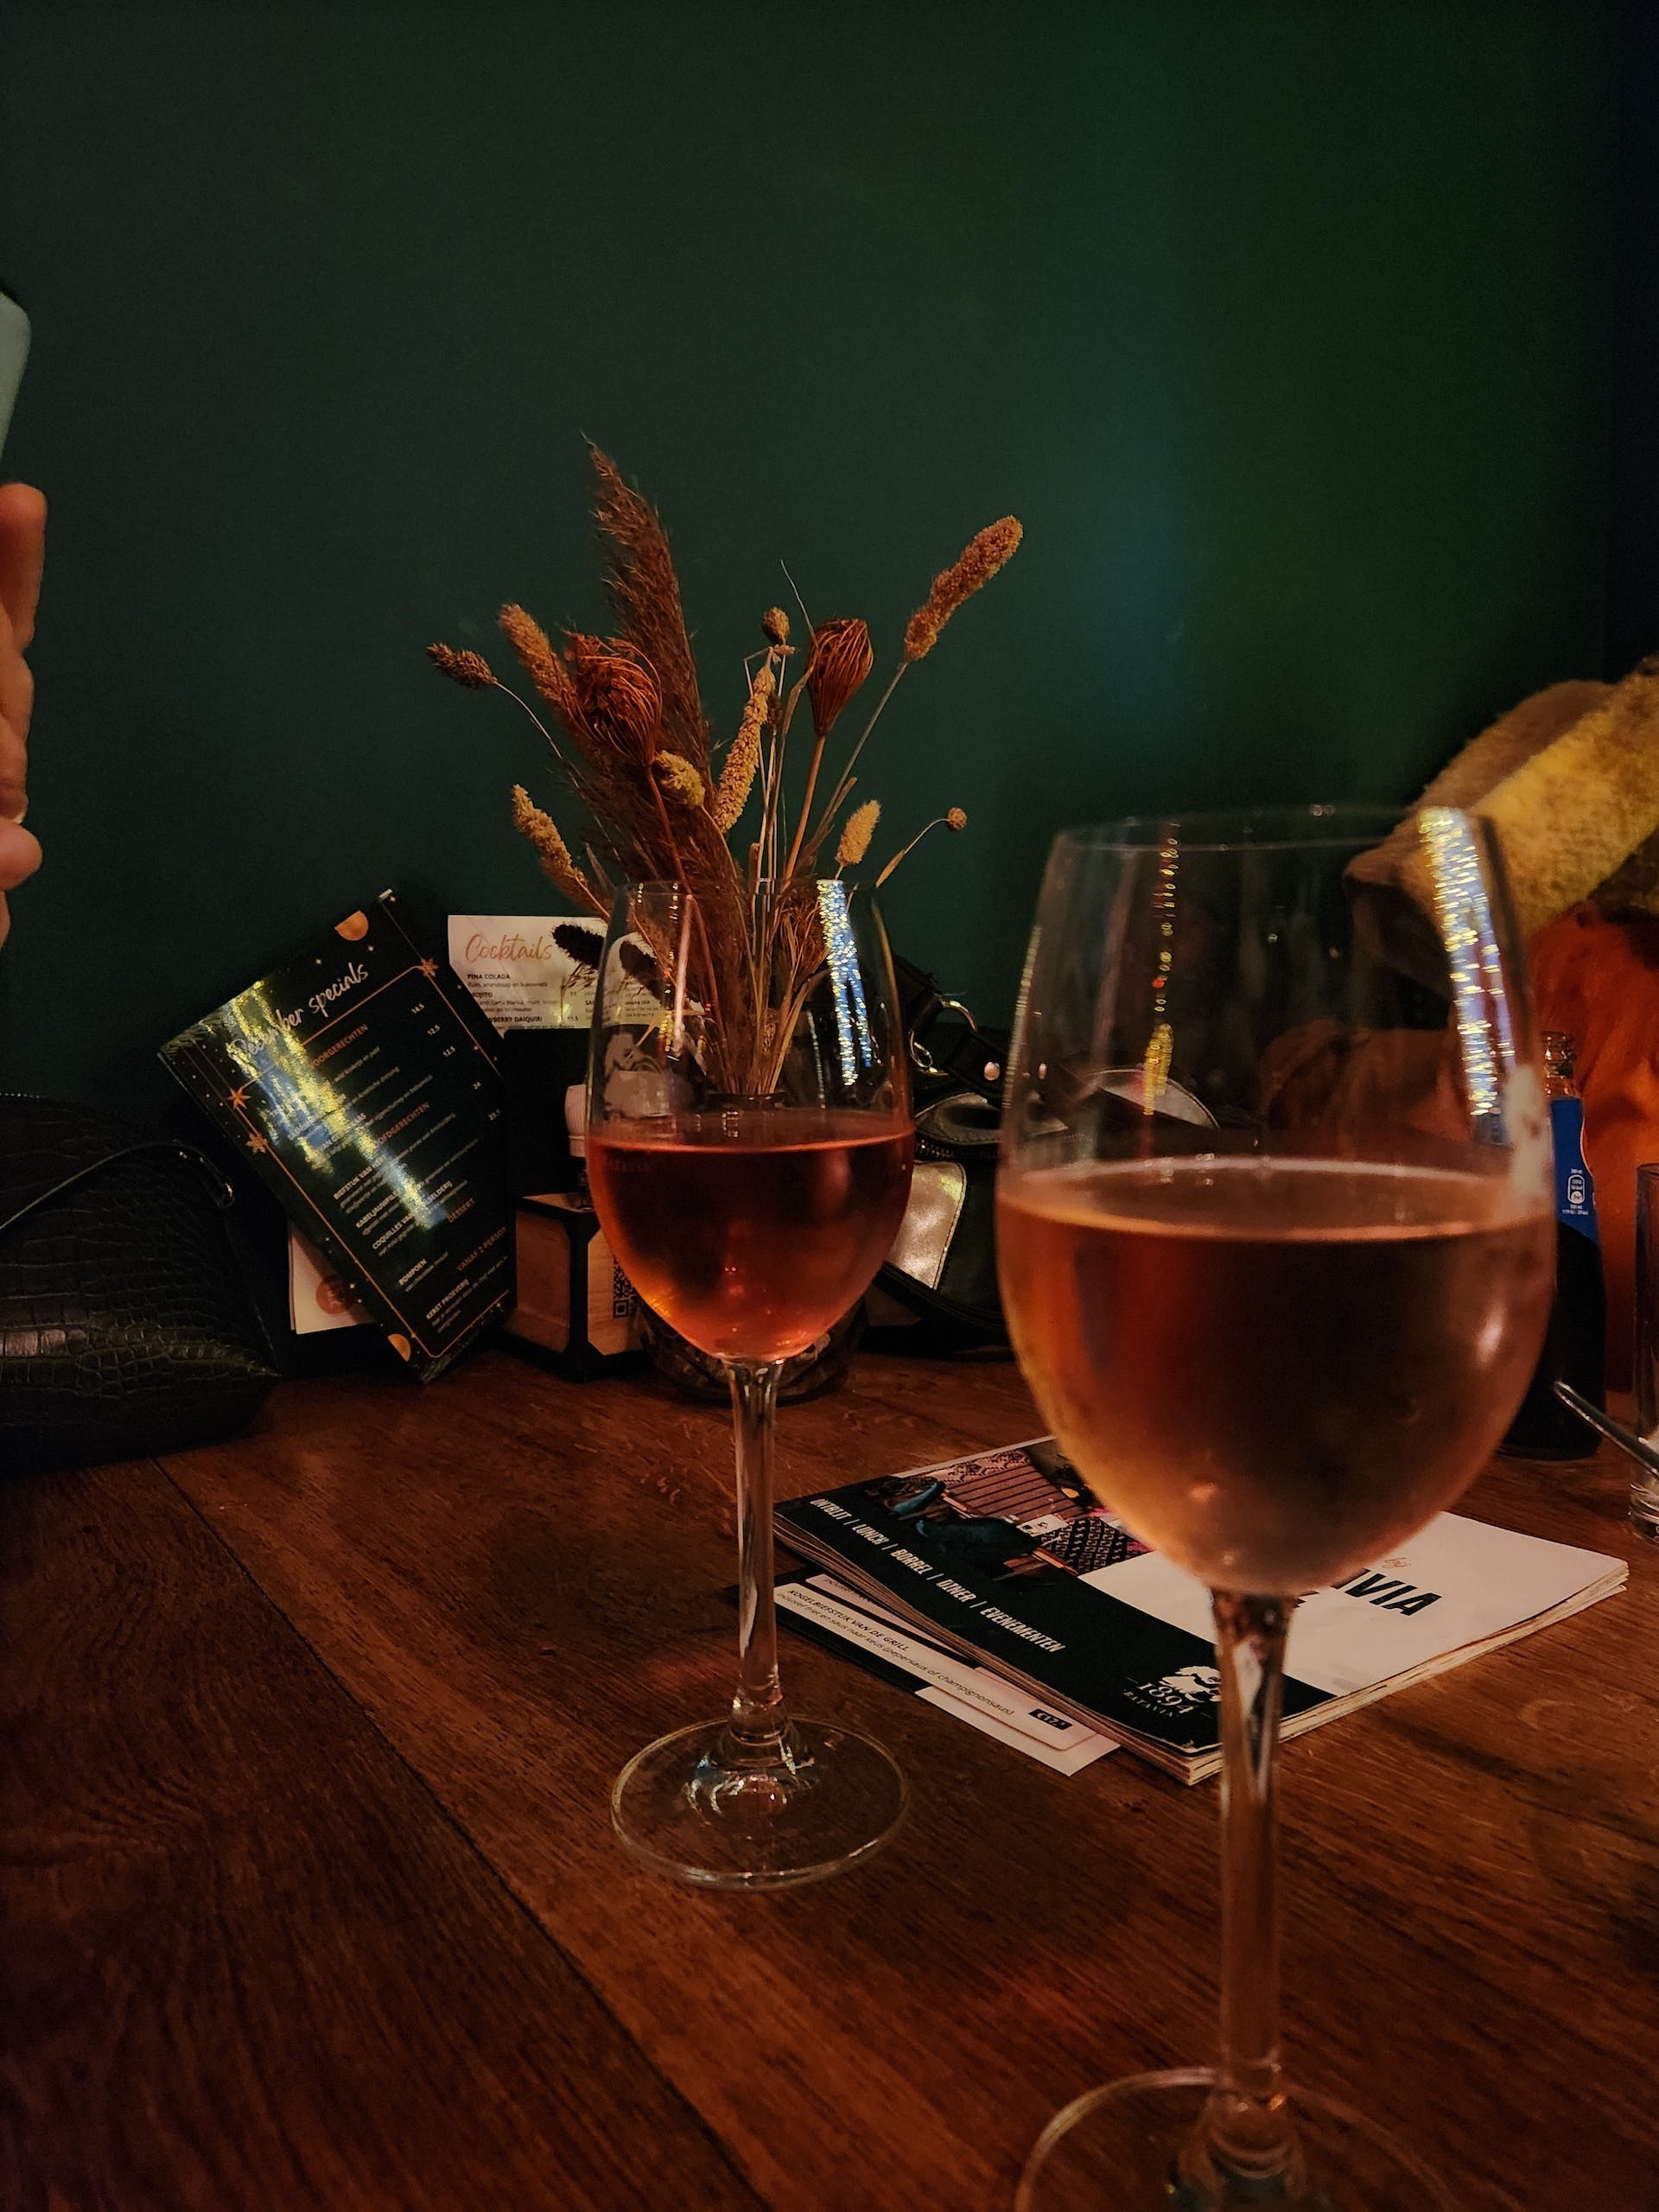 Glasses of wine on table | Source: Pexels